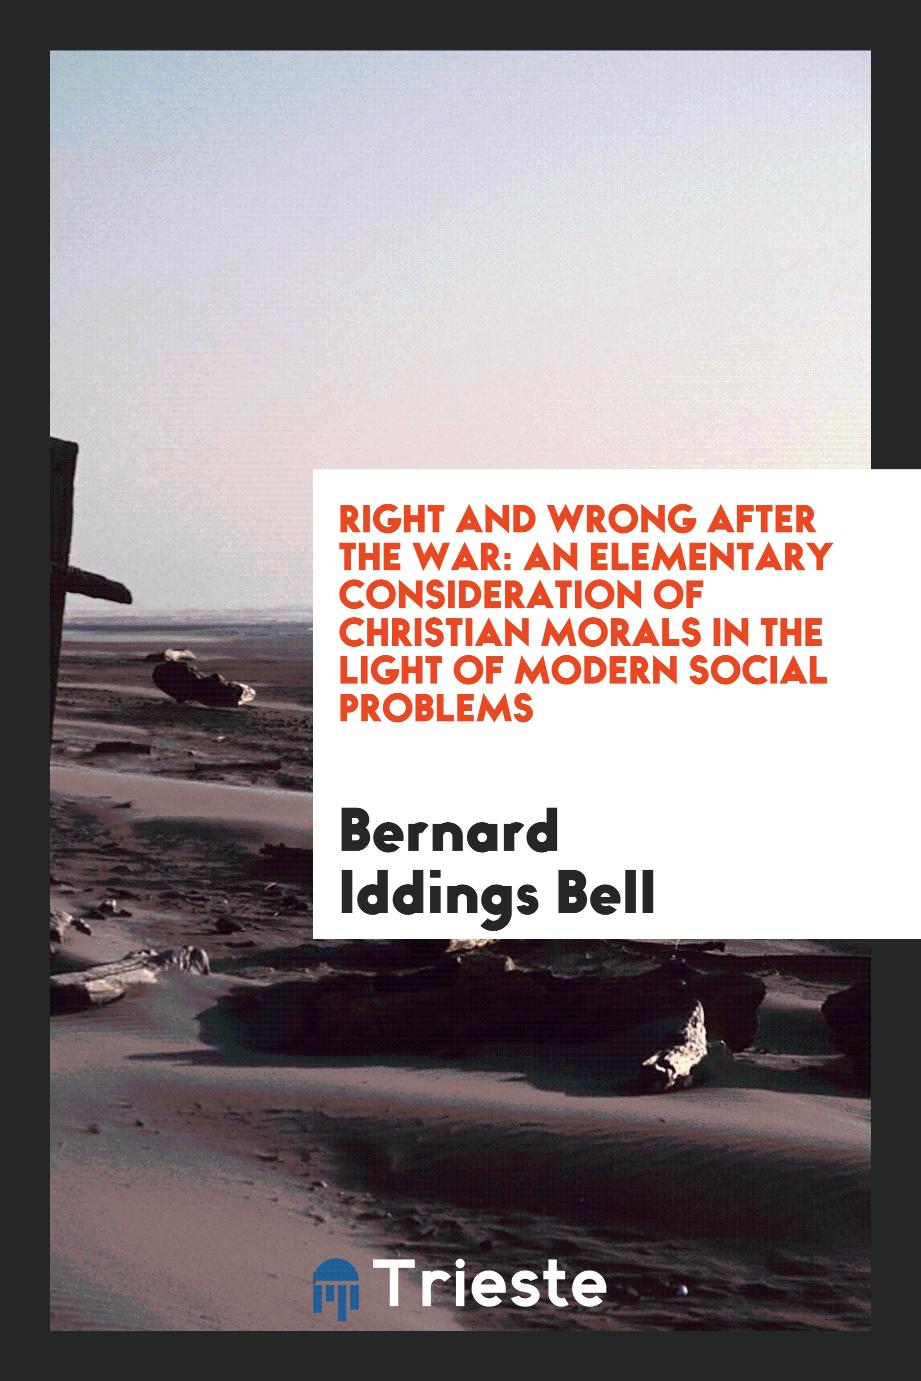 Right and Wrong After the War: An Elementary Consideration of Christian Morals in the Light of Modern Social Problems